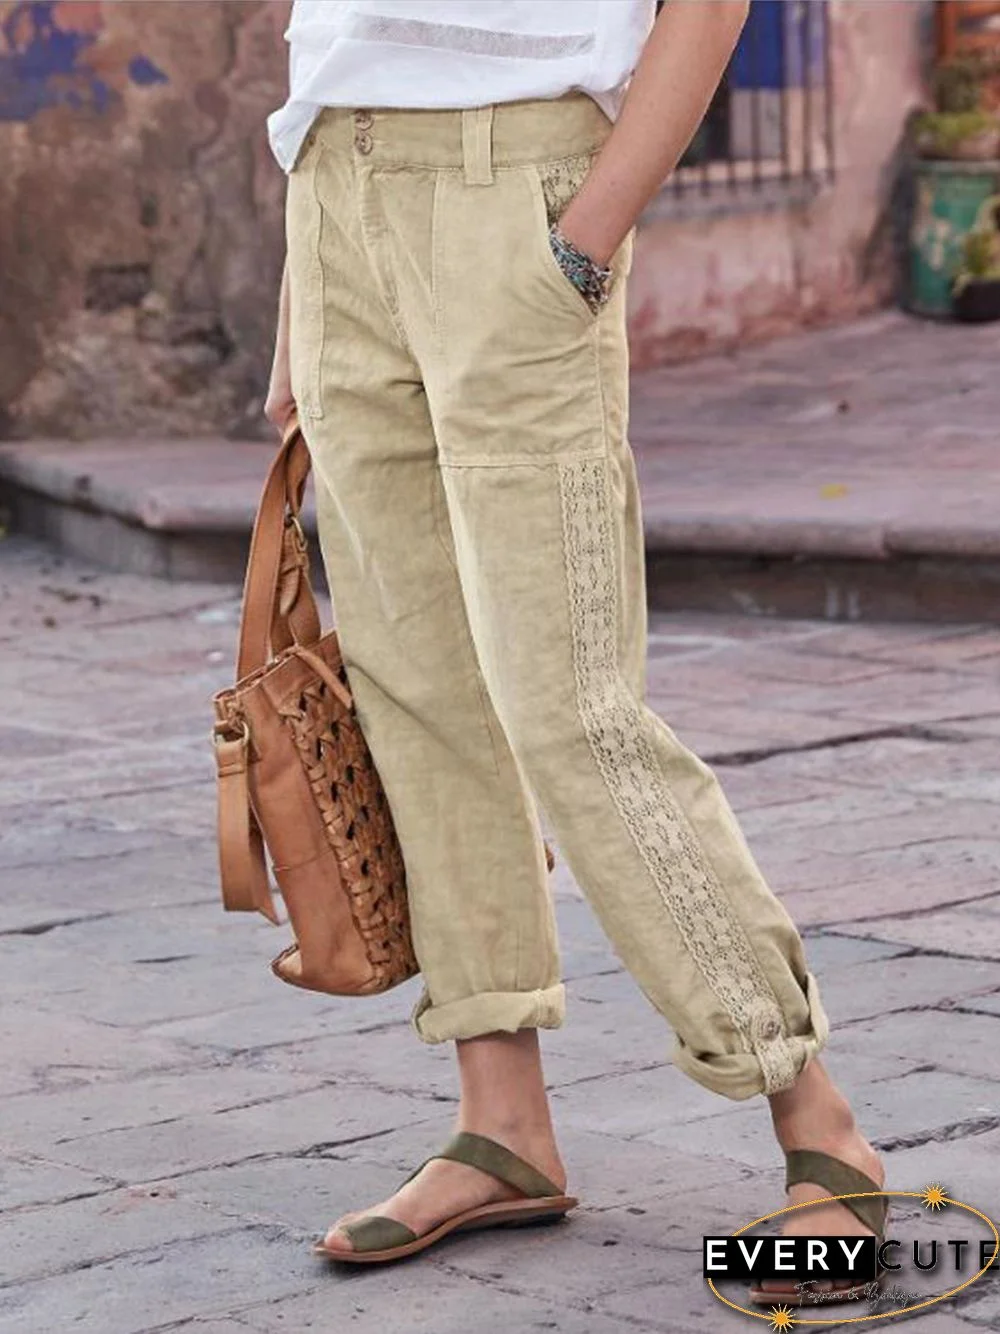 Casual Pockets Solid Lace Pants